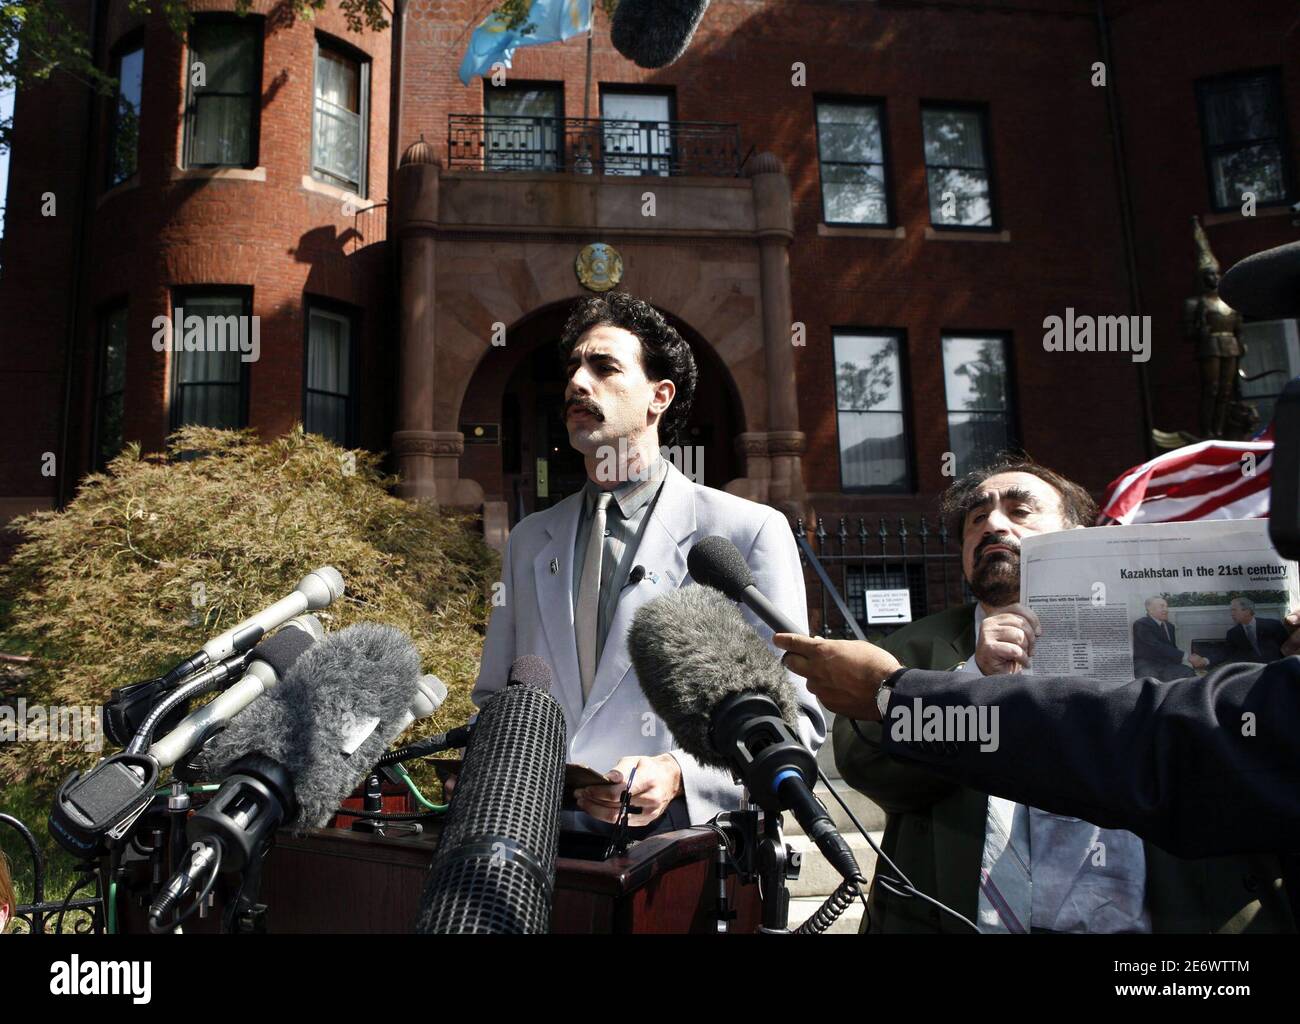 Actor Sacha Baron Cohen in the role of ficticious Kazakh journalist Borat Sagdiyev speaks in front of the Kazakh Embassy in Washington, September 28, 2006. Cohen was attempting to deliver an invitation to President George W. Bush for the opening of his movie entitled 'Borat: Cultural Leanings of America for Make Benefit Glorious Nation of Kazakhstan'.  Picture taken September 28, 2006. REUTERS/Joshua Roberts   (UNITED STATES) Stock Photo